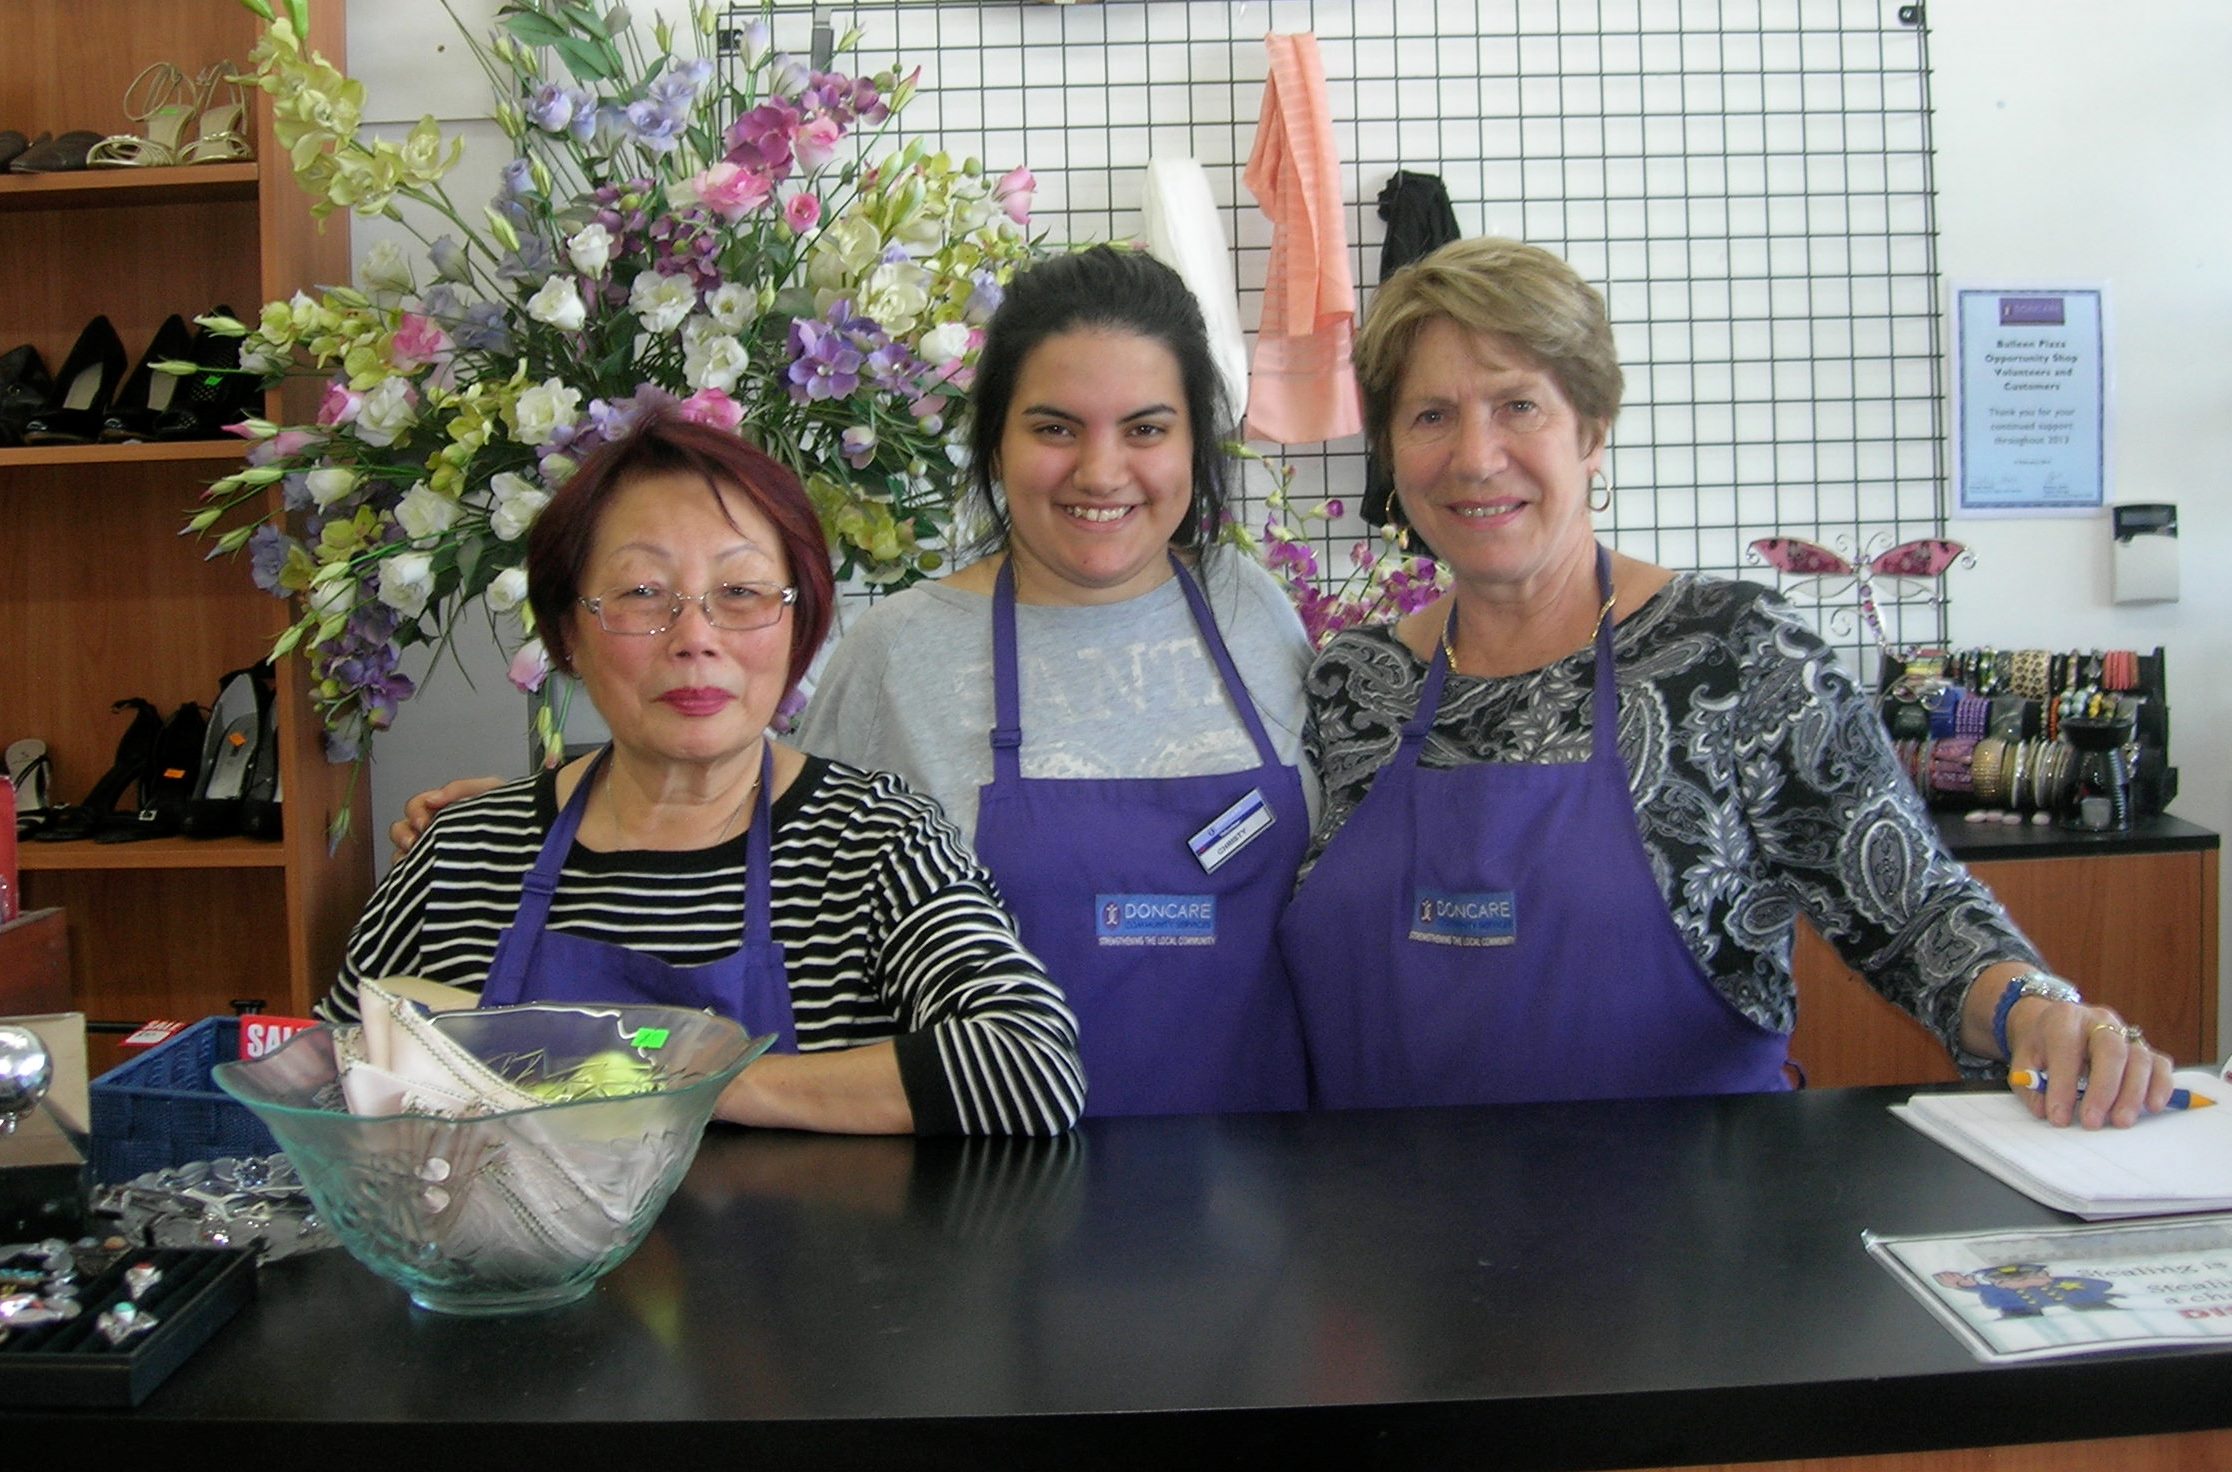 Volunteer in Doncare Op Shops | Templestowe and Tunstall Square